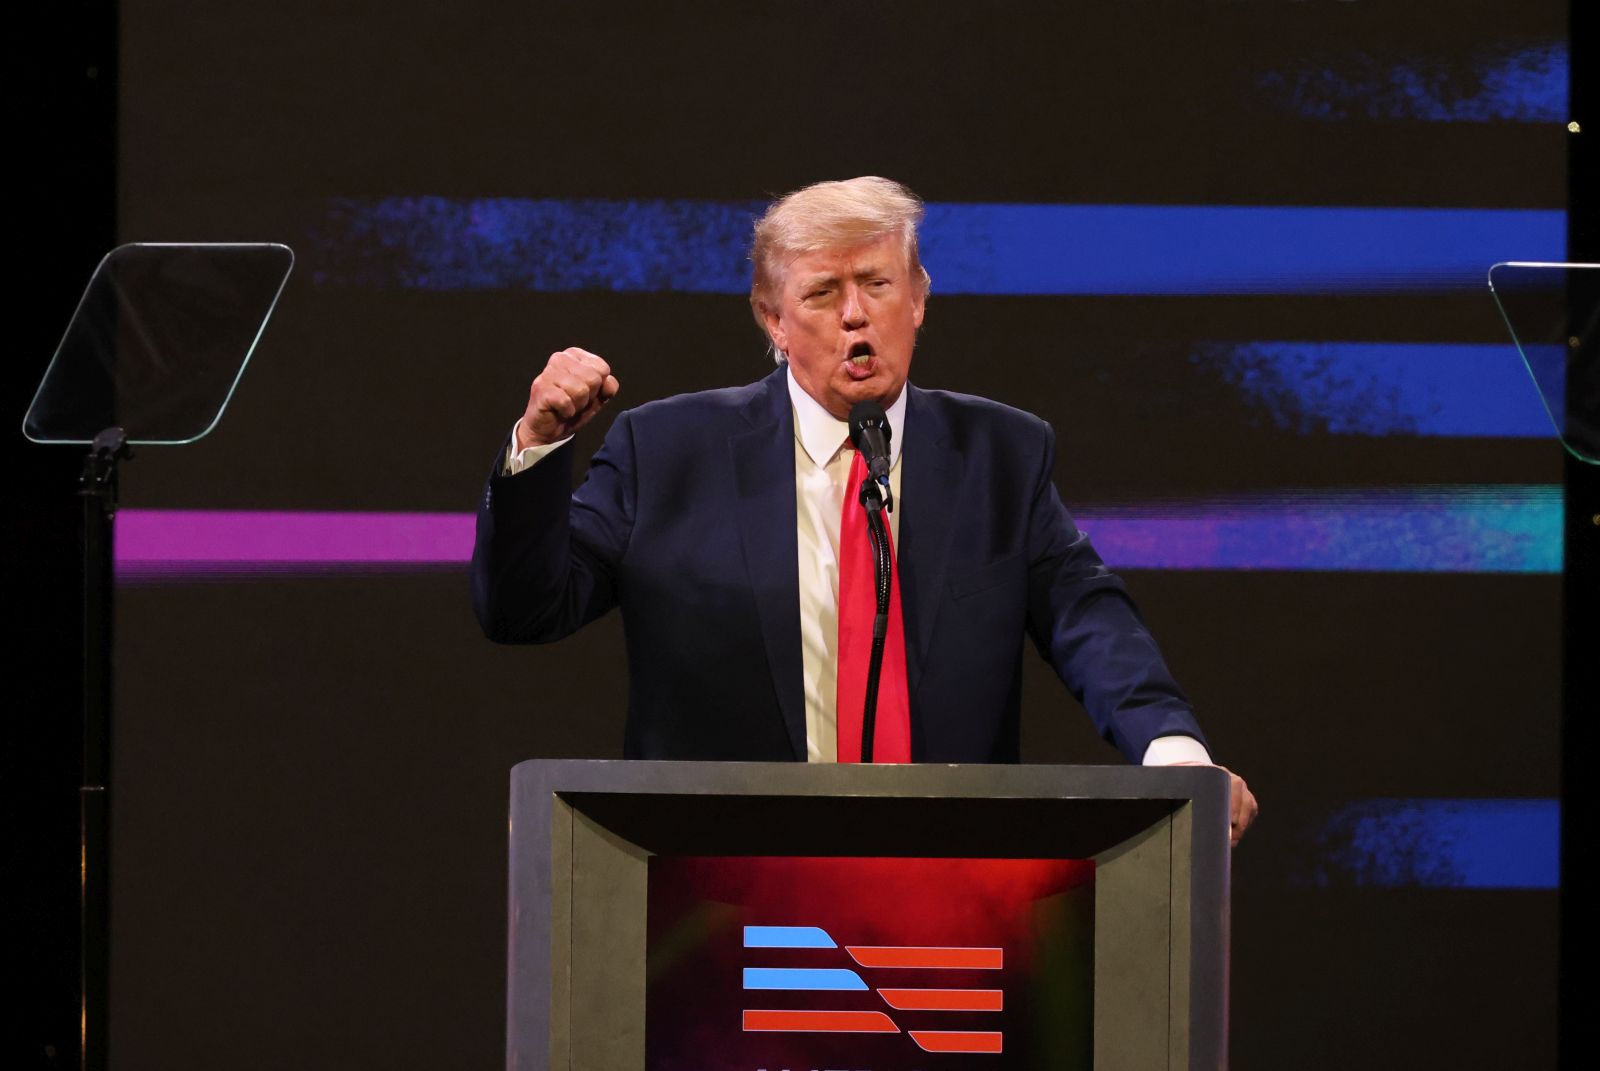 epa09947803 Former US President Donald Trump speaks at the American Freedom Tour at the Austin Convention Center in Austin, Texas, USA, 14 May 2022. The American Freedom Tour is a gathering of conservatives to celebrate Faith, Family, Finances, and Freedom.  EPA/ADAM DAVIS